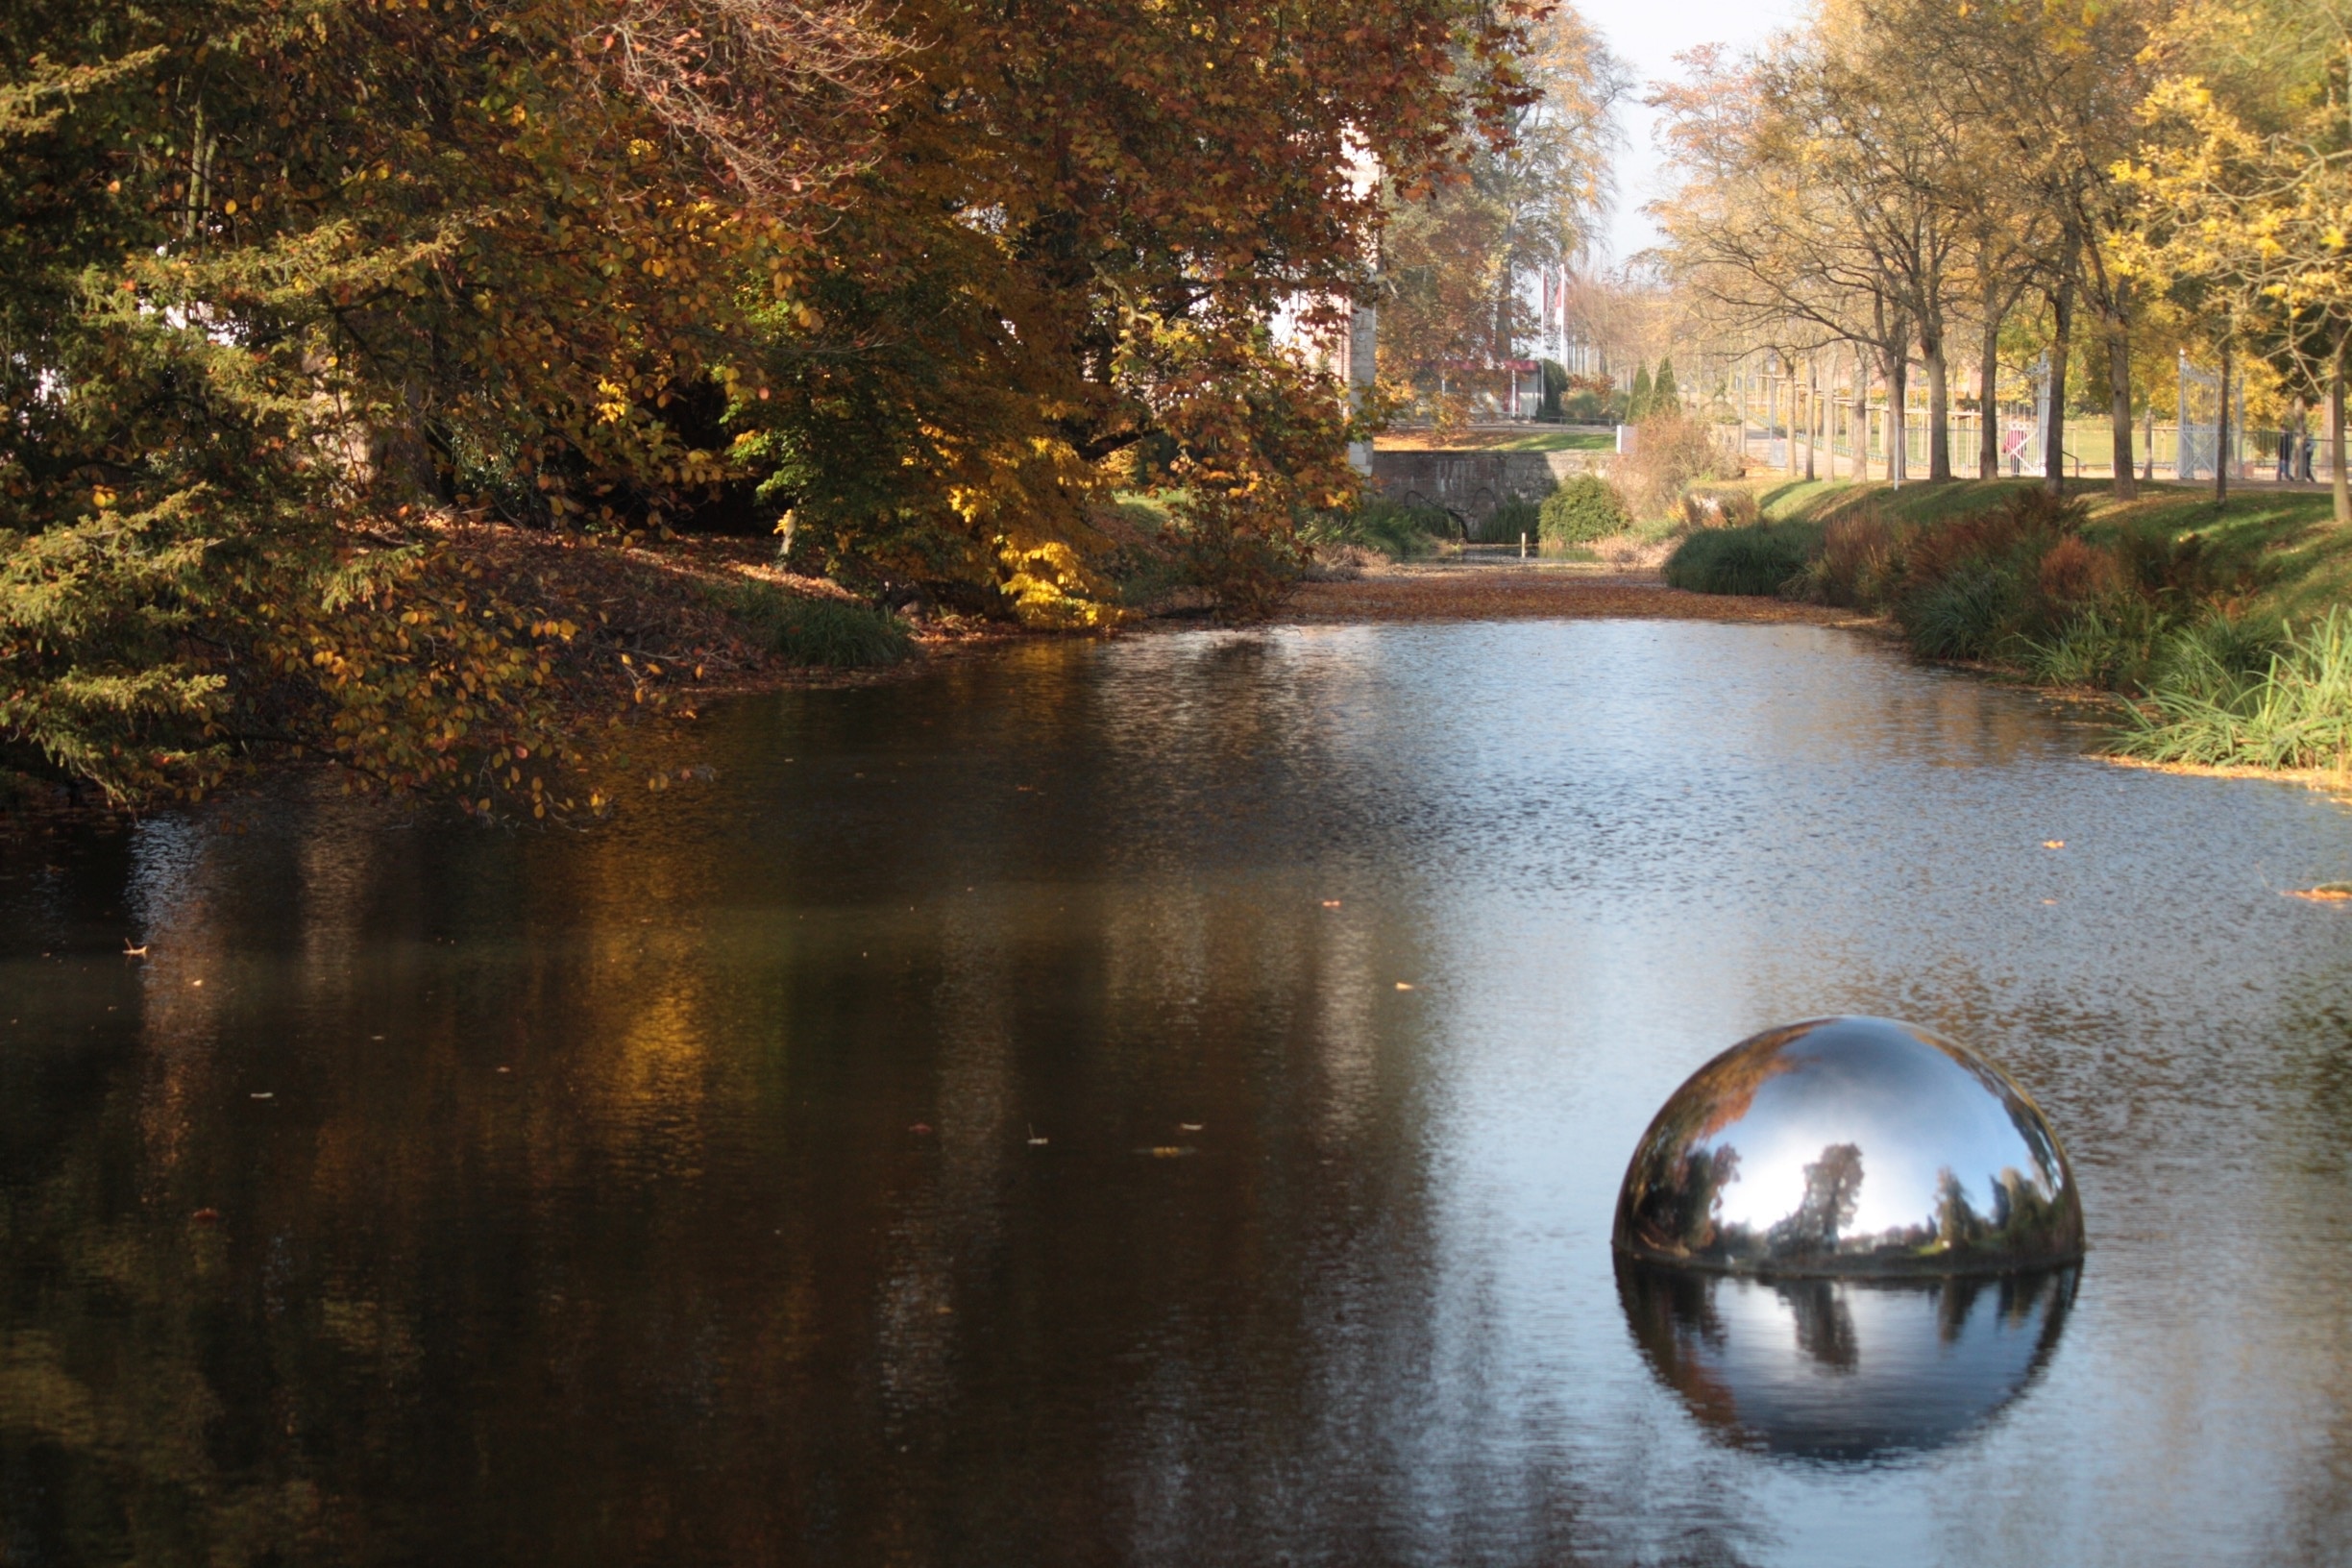 The large steel balls were placed in the water, which produces an interesting reflection of the surrounding trees.